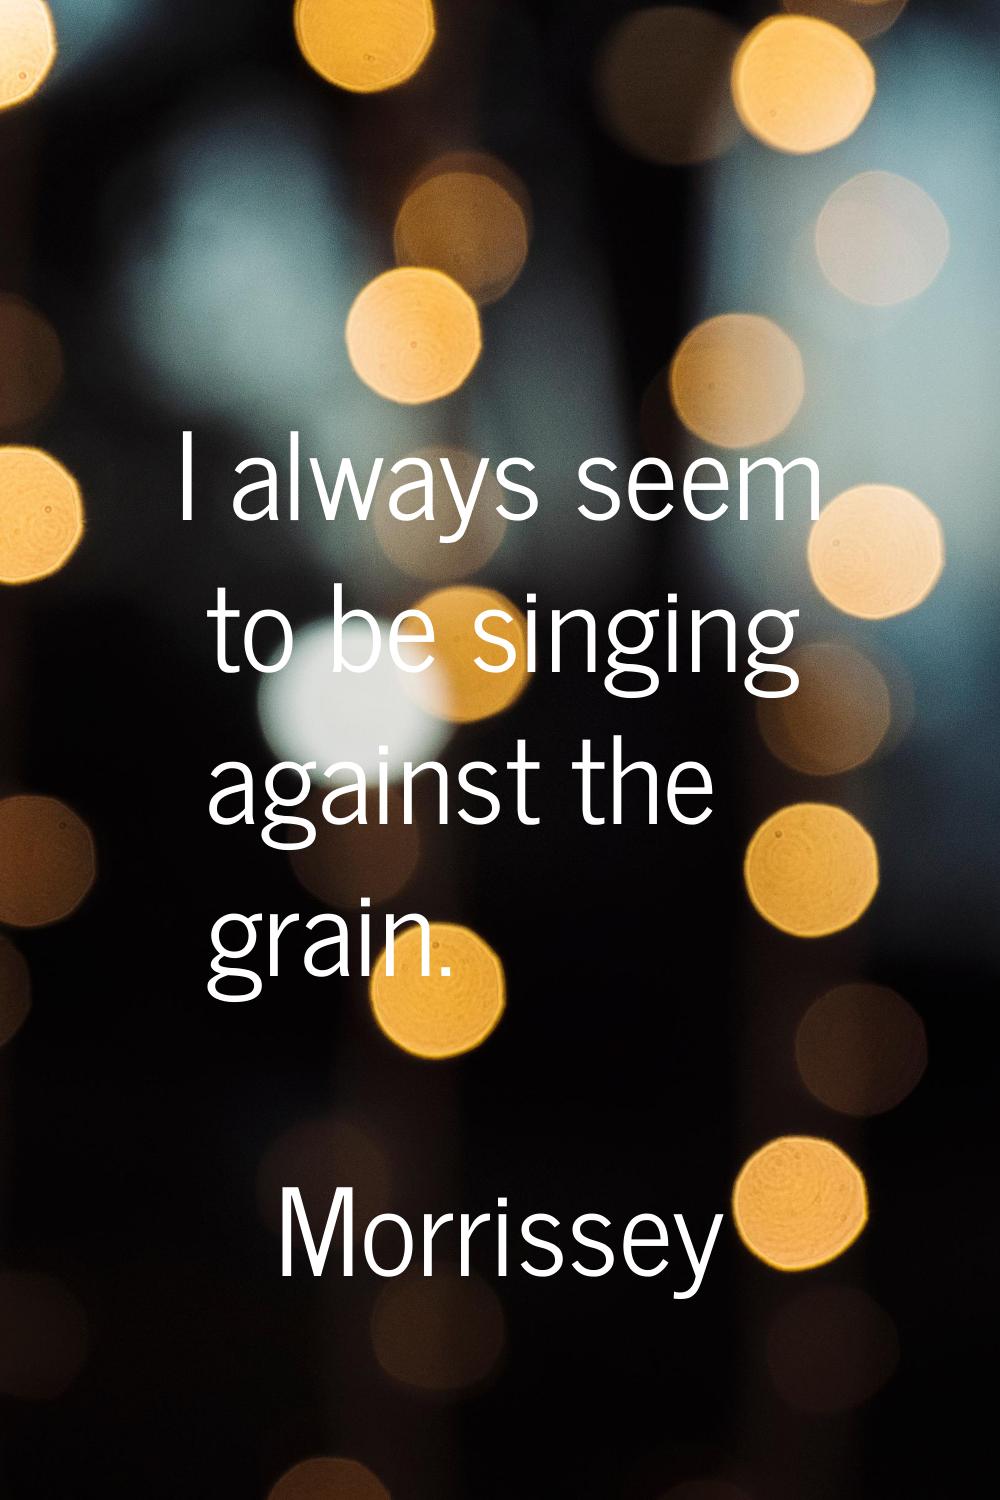 I always seem to be singing against the grain.